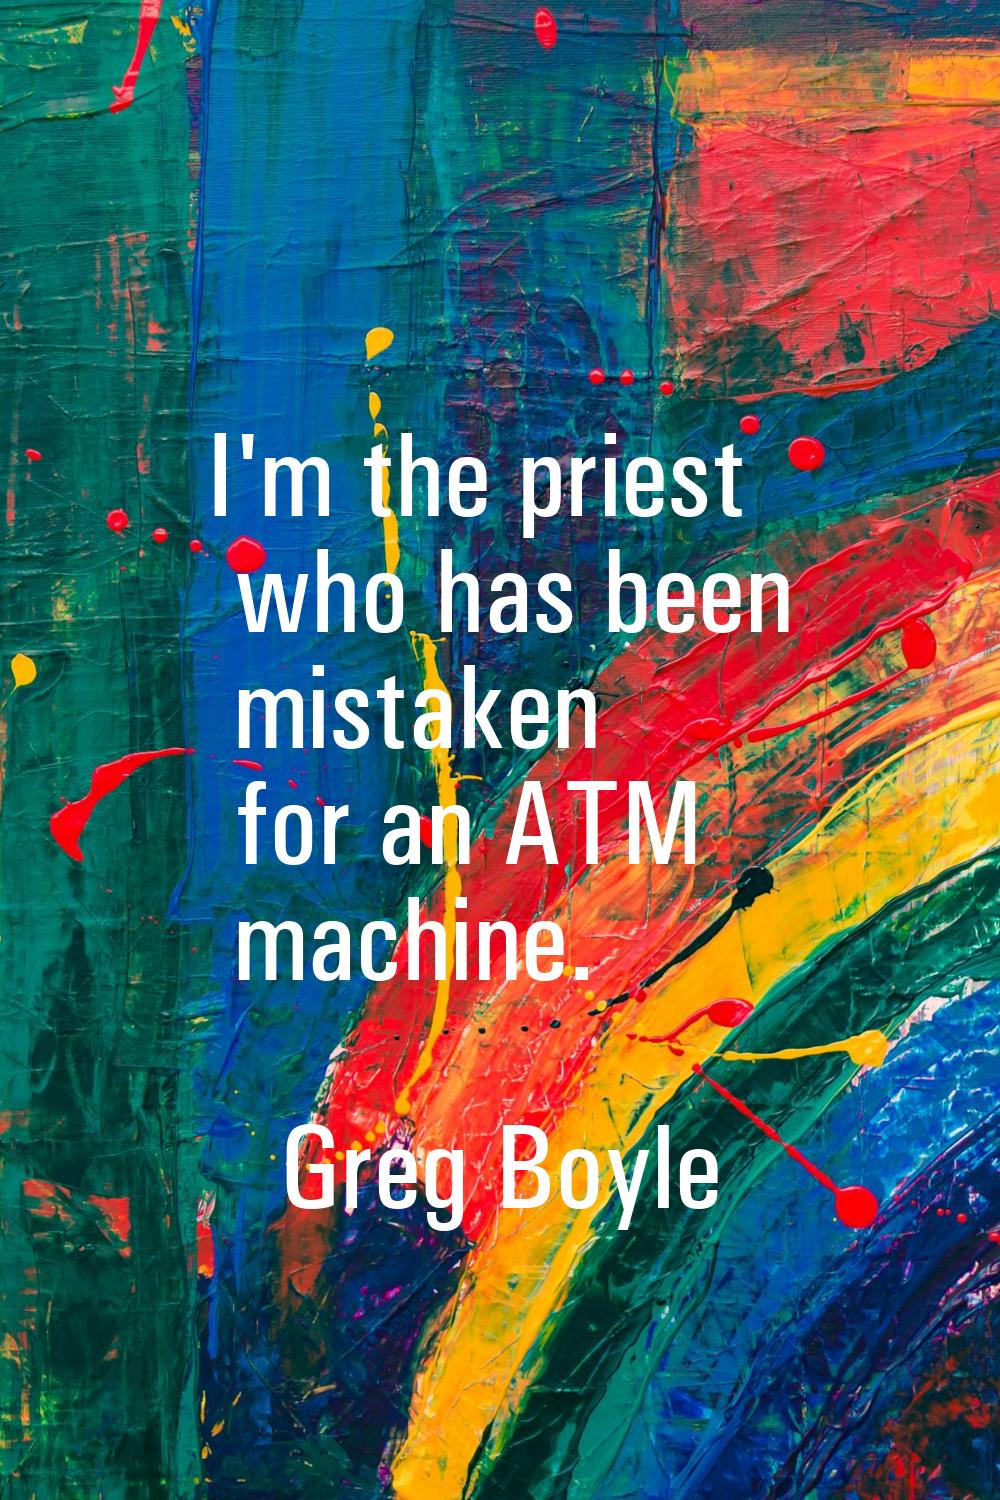 I'm the priest who has been mistaken for an ATM machine.